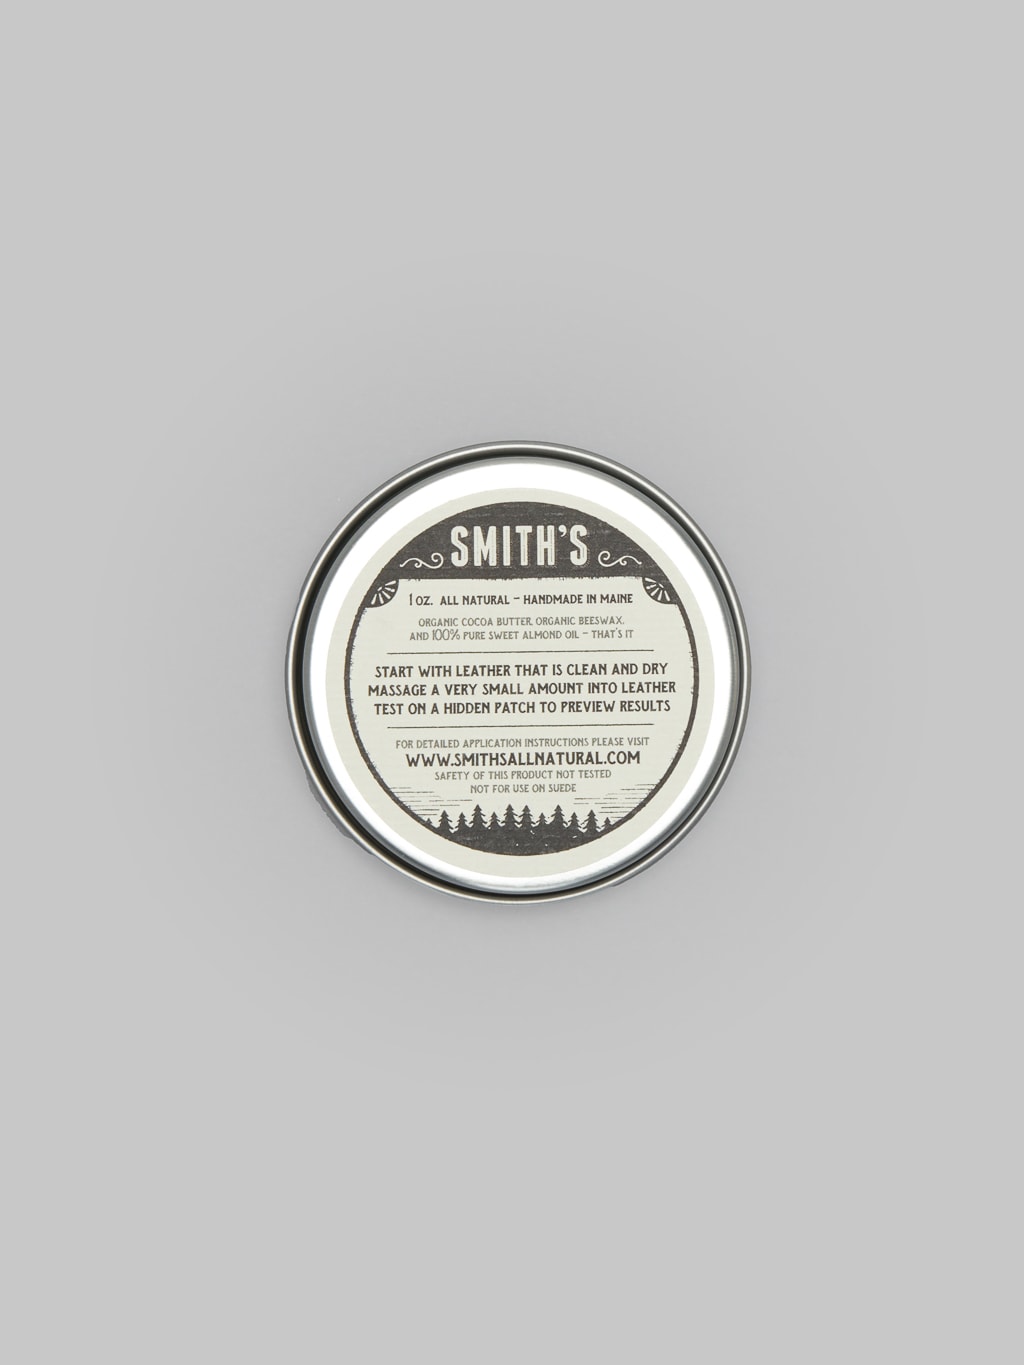 Smith s Leather Balm ingredients composition